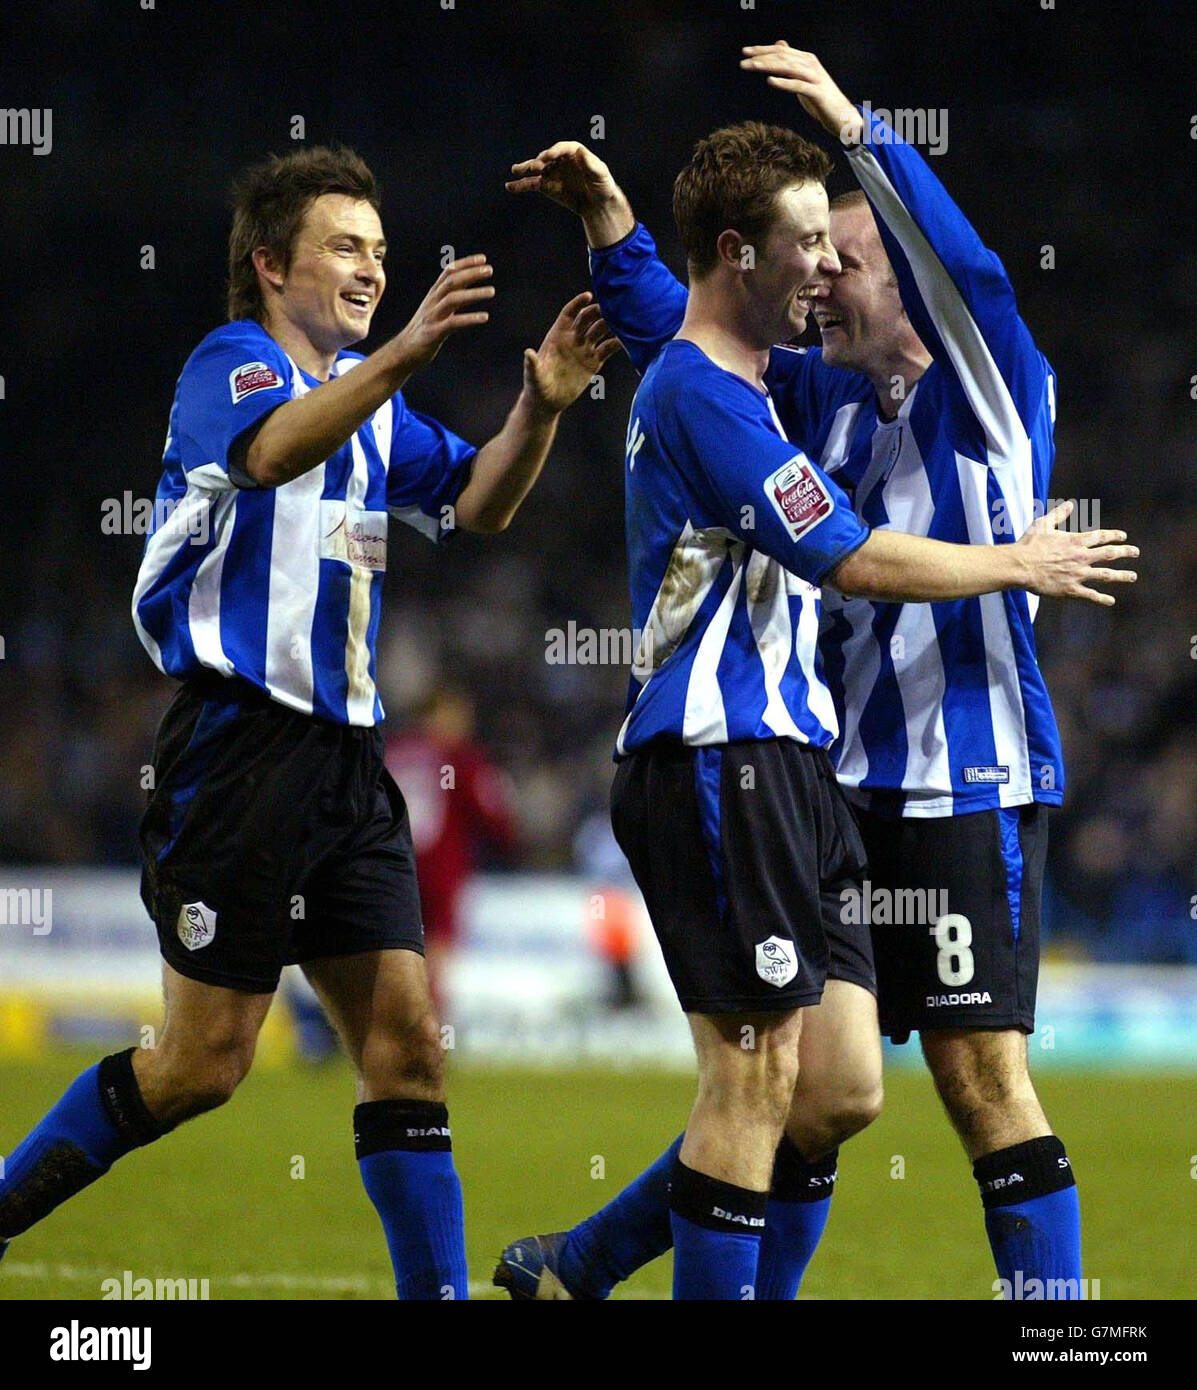 Sheffield Wednesday's Steve MacLean (centre) celebrates witht team-mates Paul Heckingbottom and Matthew Hamshaw Stock Photo